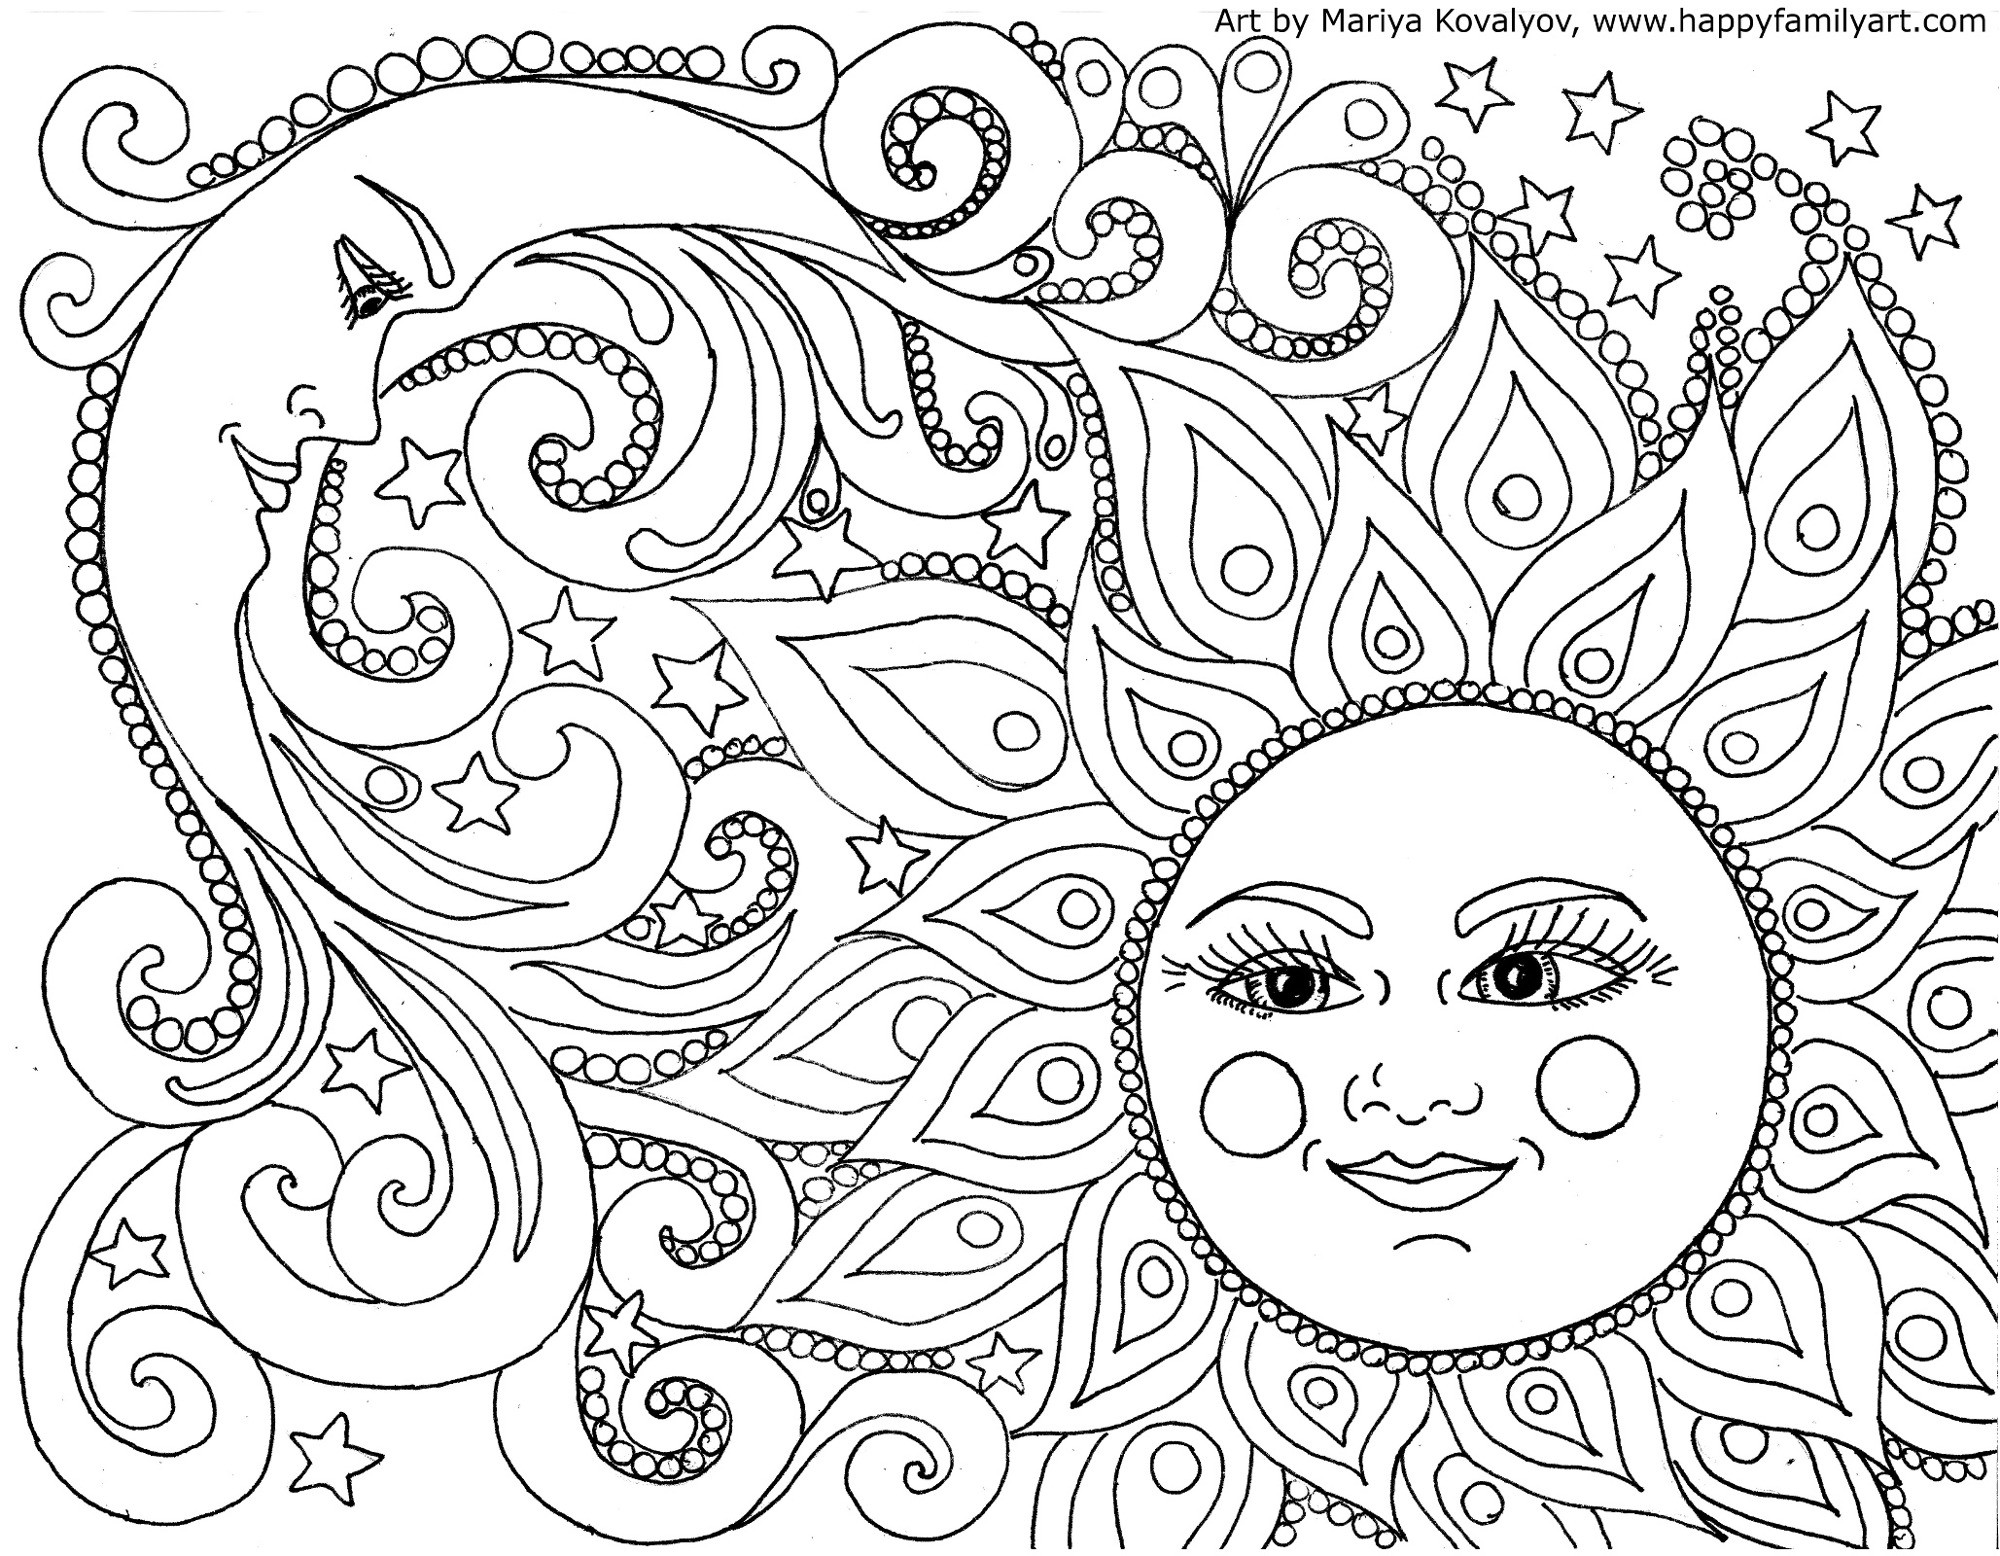 Nature Coloring Pages For Boys
 Happy Family Art original and fun coloring pages